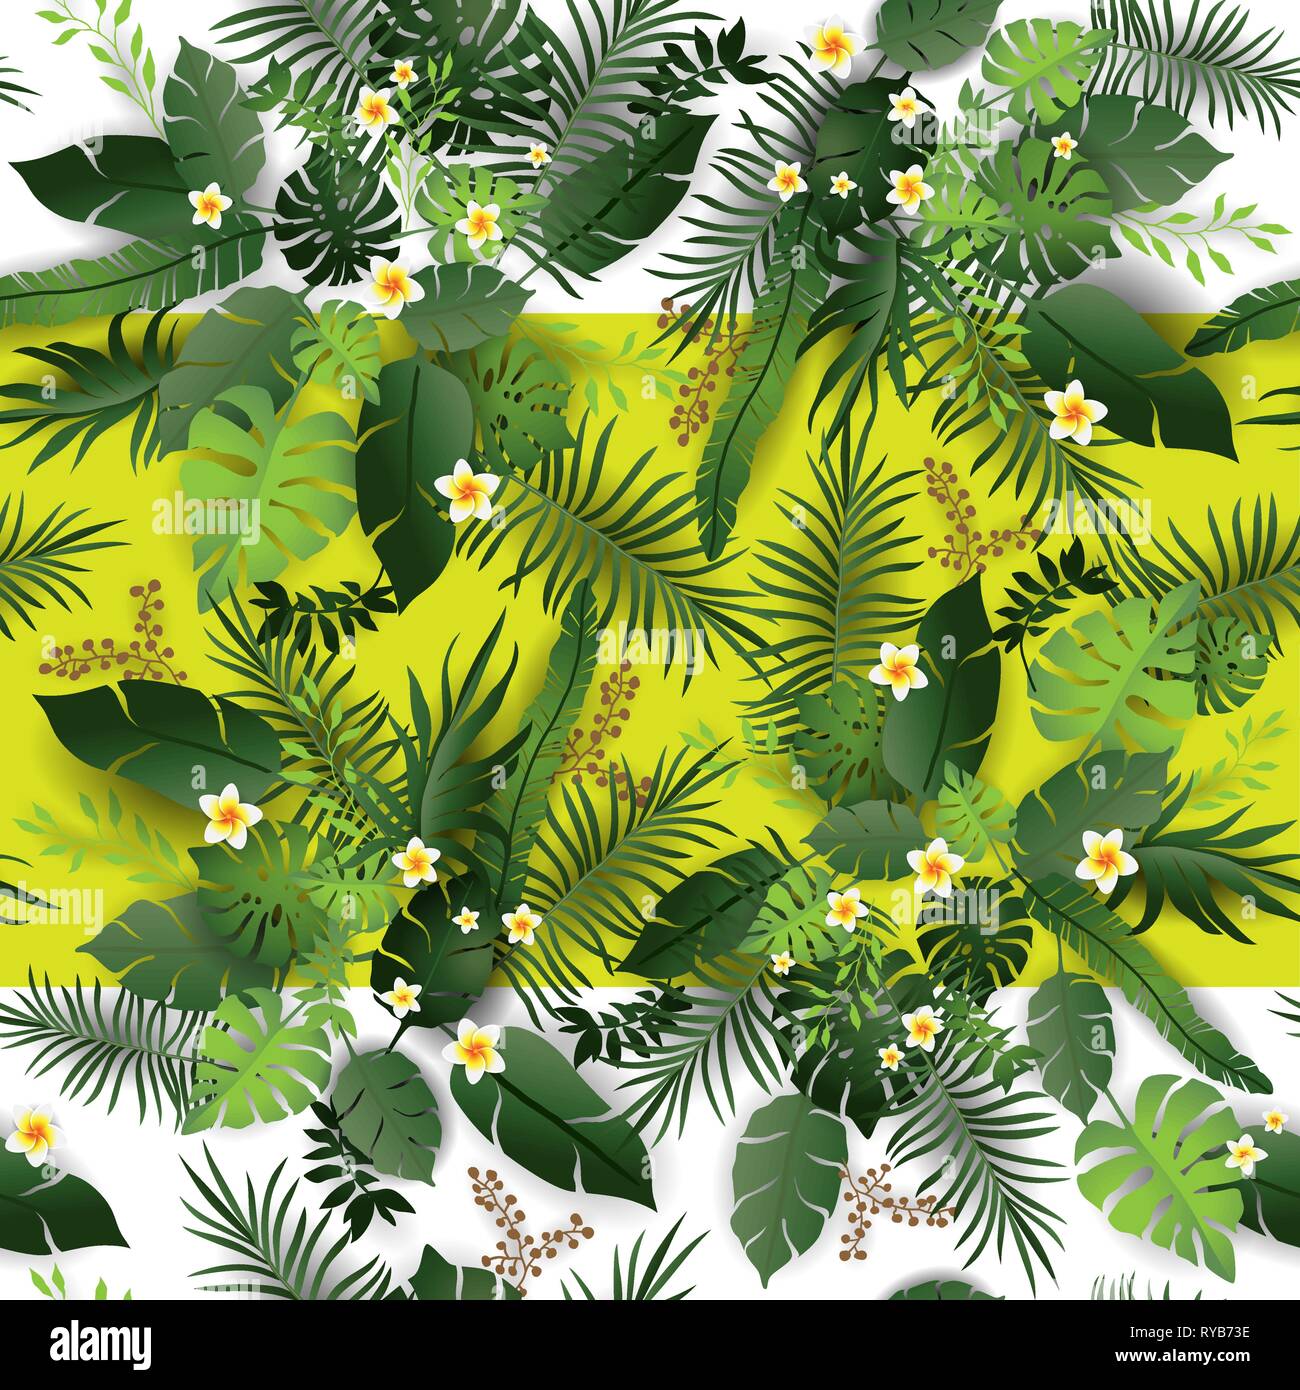 Seamless Pattern Exotic Floral Background. Tropical Flowers and Leaves Backdrop. Greenery Jungle Seamless Design Stock Vector